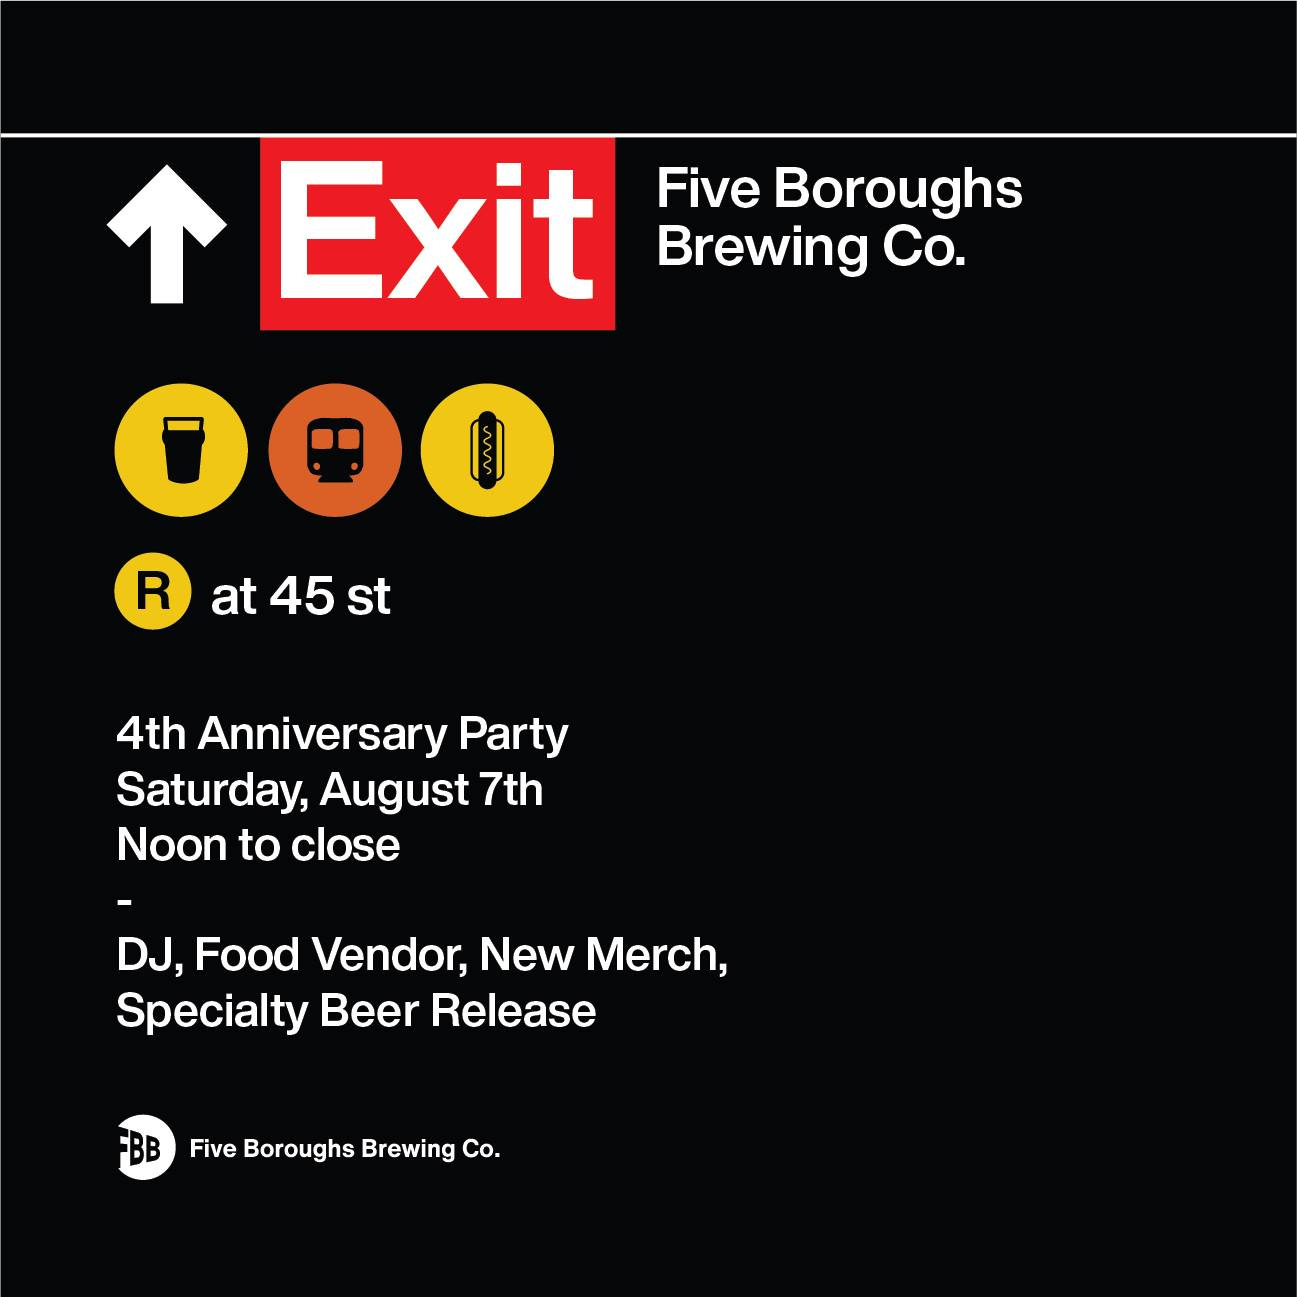 May be an image of text that says 'Exit Five Boroughs Brewing Co. 000 R at 45 st 4th Anniversary Party Saturday, August 7th Noon to close DJ, Food Vendor, New Merch, Specialty Beer Release BB Five Boroughs Brewing Co.'